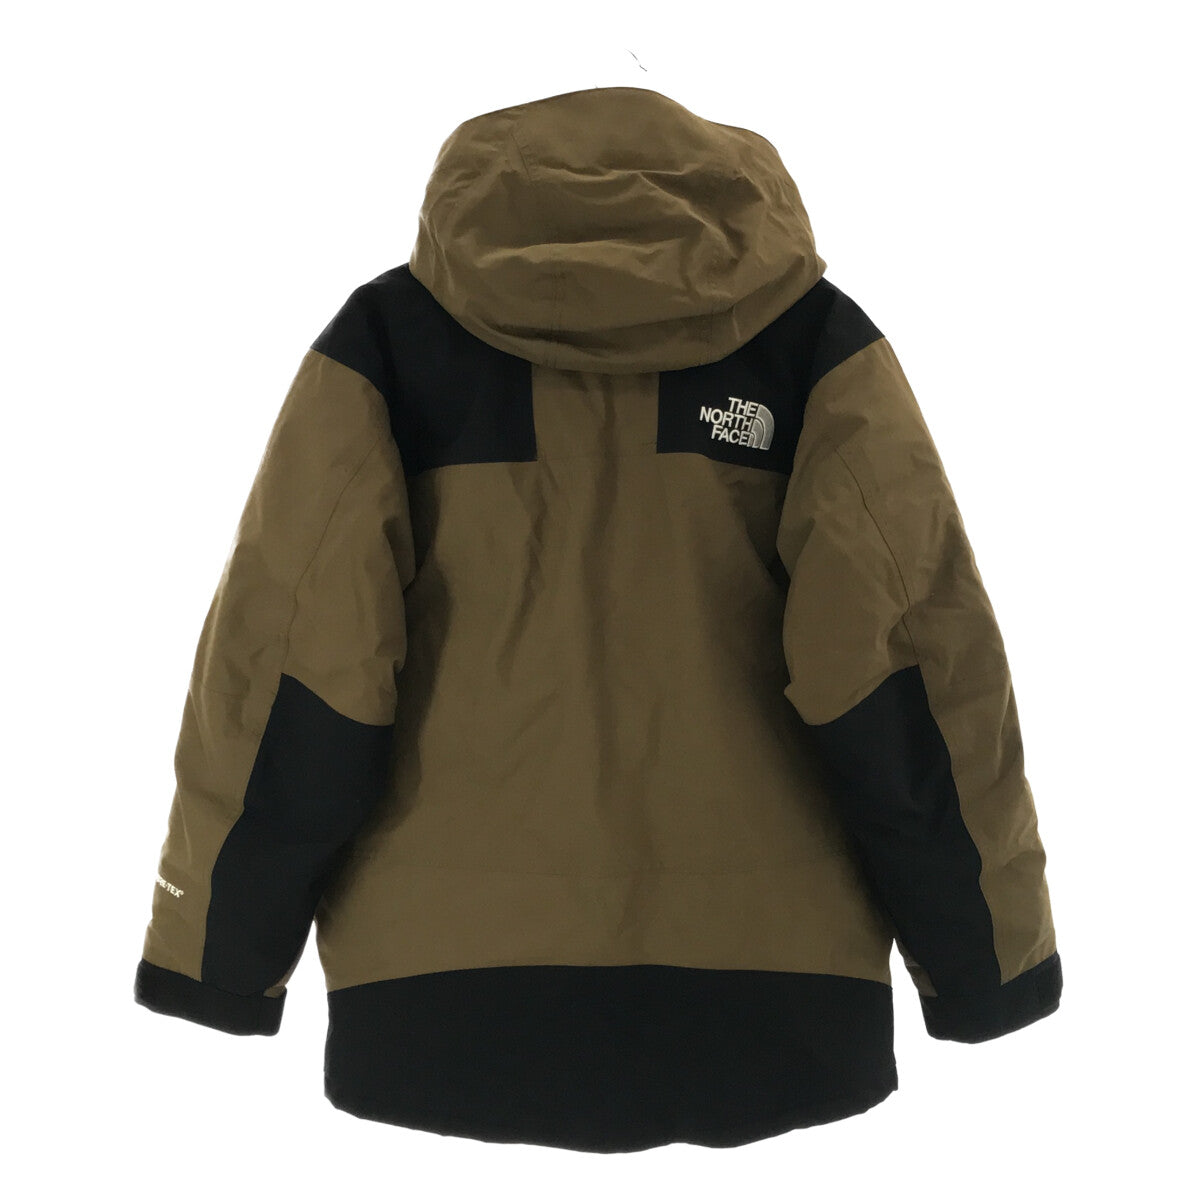 THE NORTH FACE / ザノースフェイス | ND91837 Mountain Down Jacket 